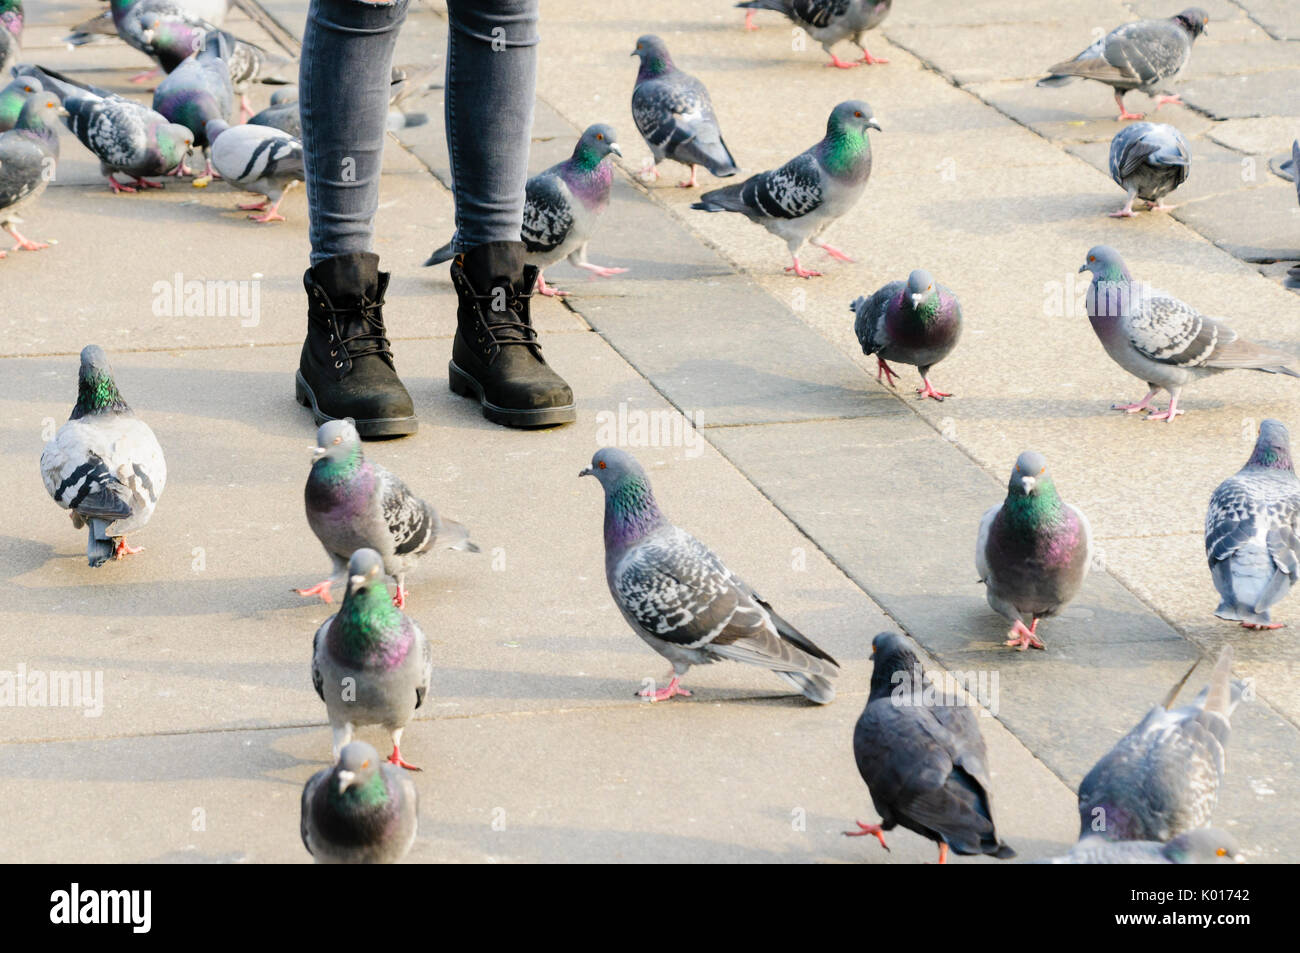 A woman stands on a footpath with pigeons at her feet Stock Photo